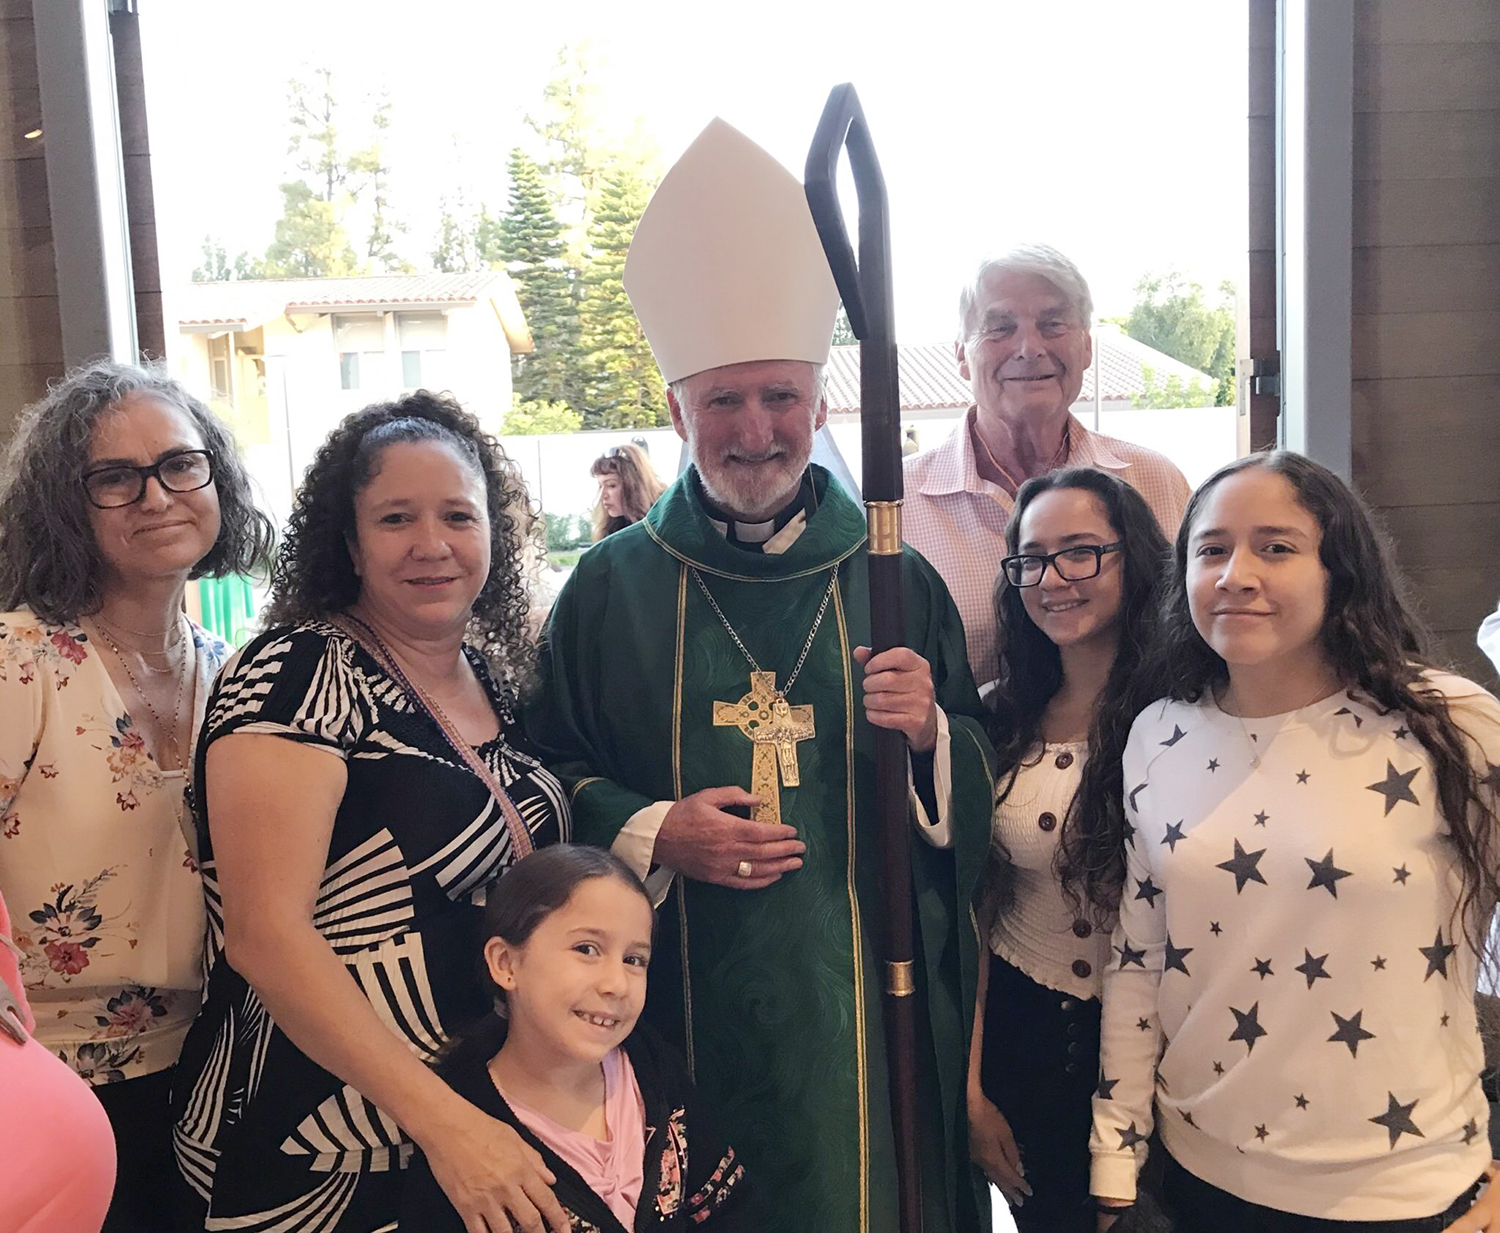 Bishop O'Connell, center, with volunteers poses for a photo with volunteers and a family whose asylum case the bishop supported. Courtesy of Linda Dakin-Grim